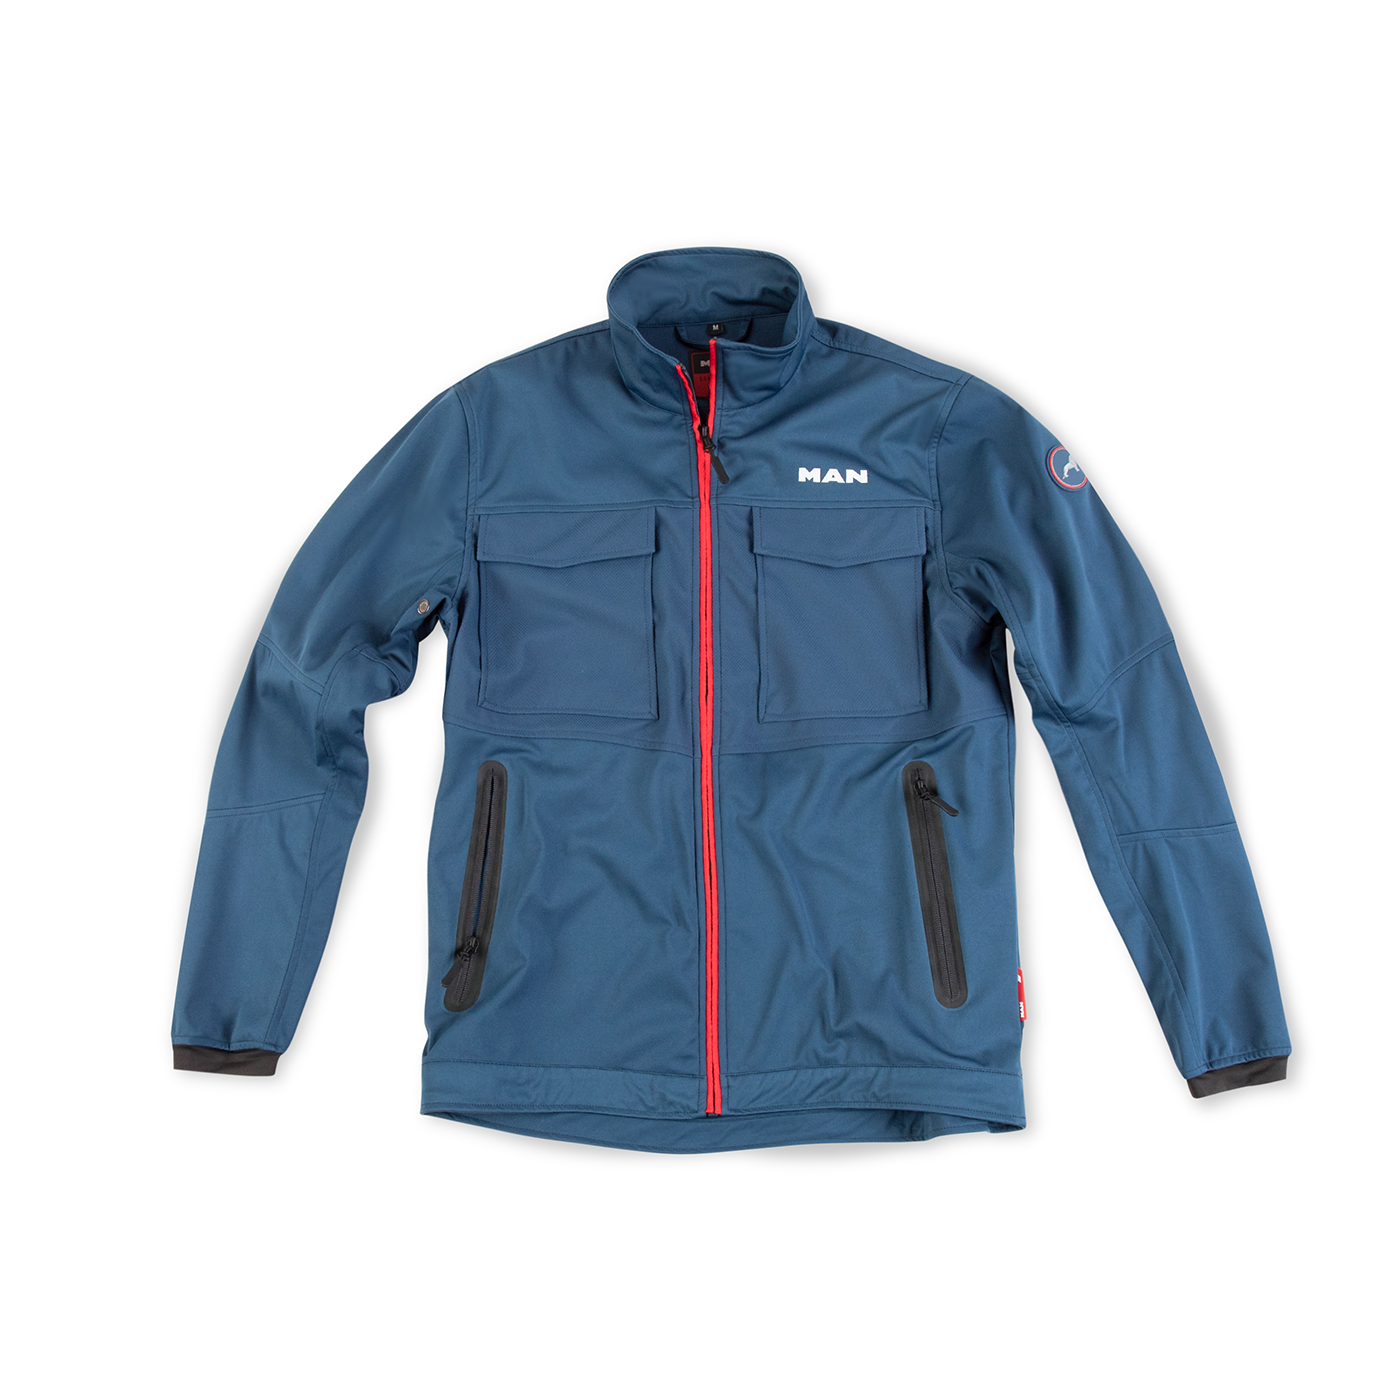 MAN Lion Collection Men's softshell jacket